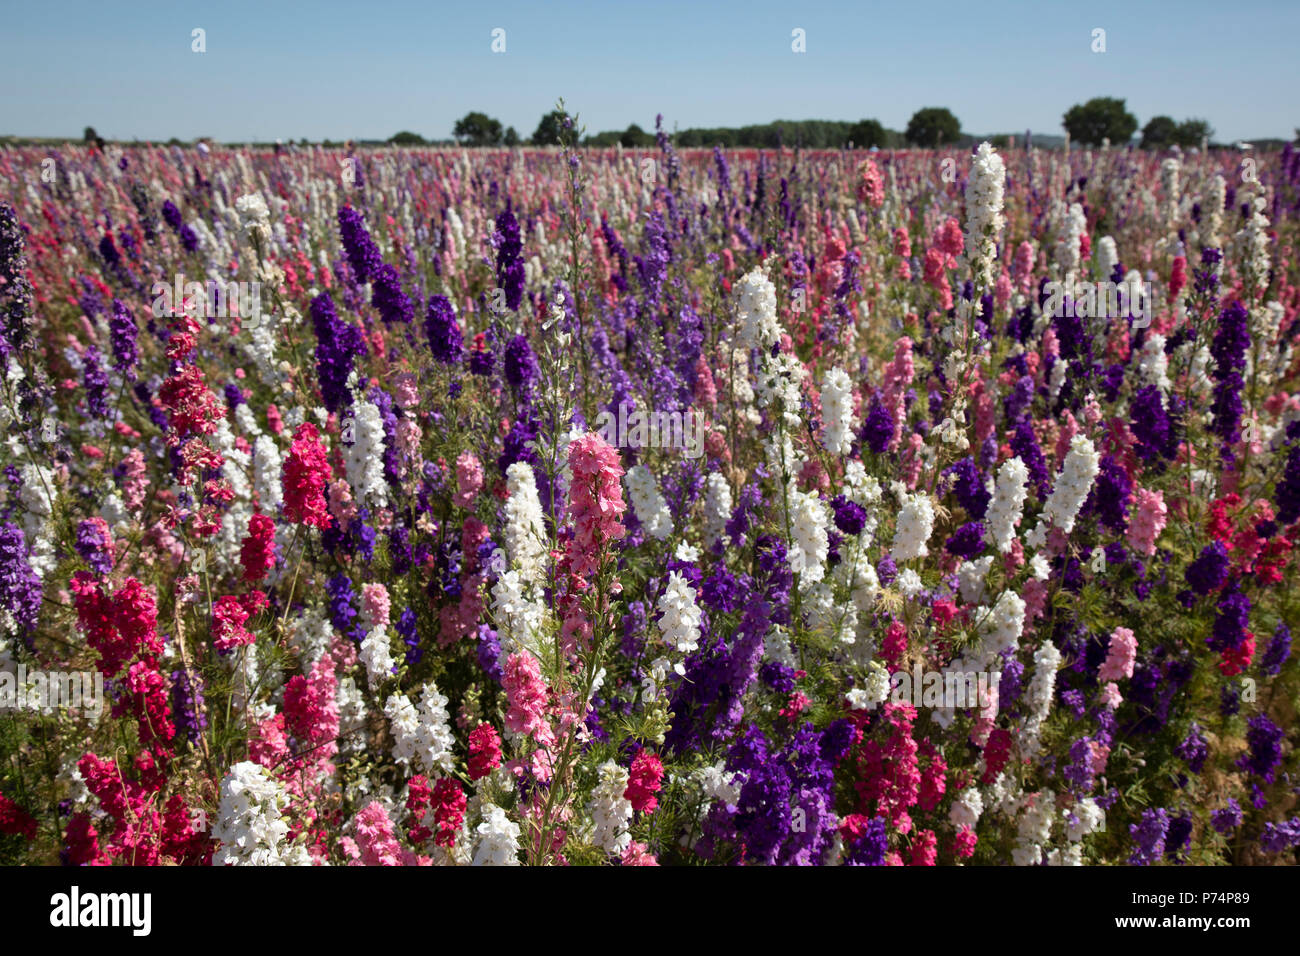 Acres of delphiniums and cornflowers in bloom on the Wyke Manor Estate in Worcestershire on 3rd July 2018 in Wick, near Pershore, United Kingdom. The Confetti Flower Field is a spectacular sight, and is run by the Real Flower Petal Confetti Company, the UK’s original wedding petal grower who grow natural, biodegradable wedding confetti. The Wyke Manor Estate in Worcestershire is alive with colour each summer with Delphinium and wildflowers. The Confetti Flower Field is open to the public for a short time each summer so visitors can come and enjoy the amazing colours. Stock Photo